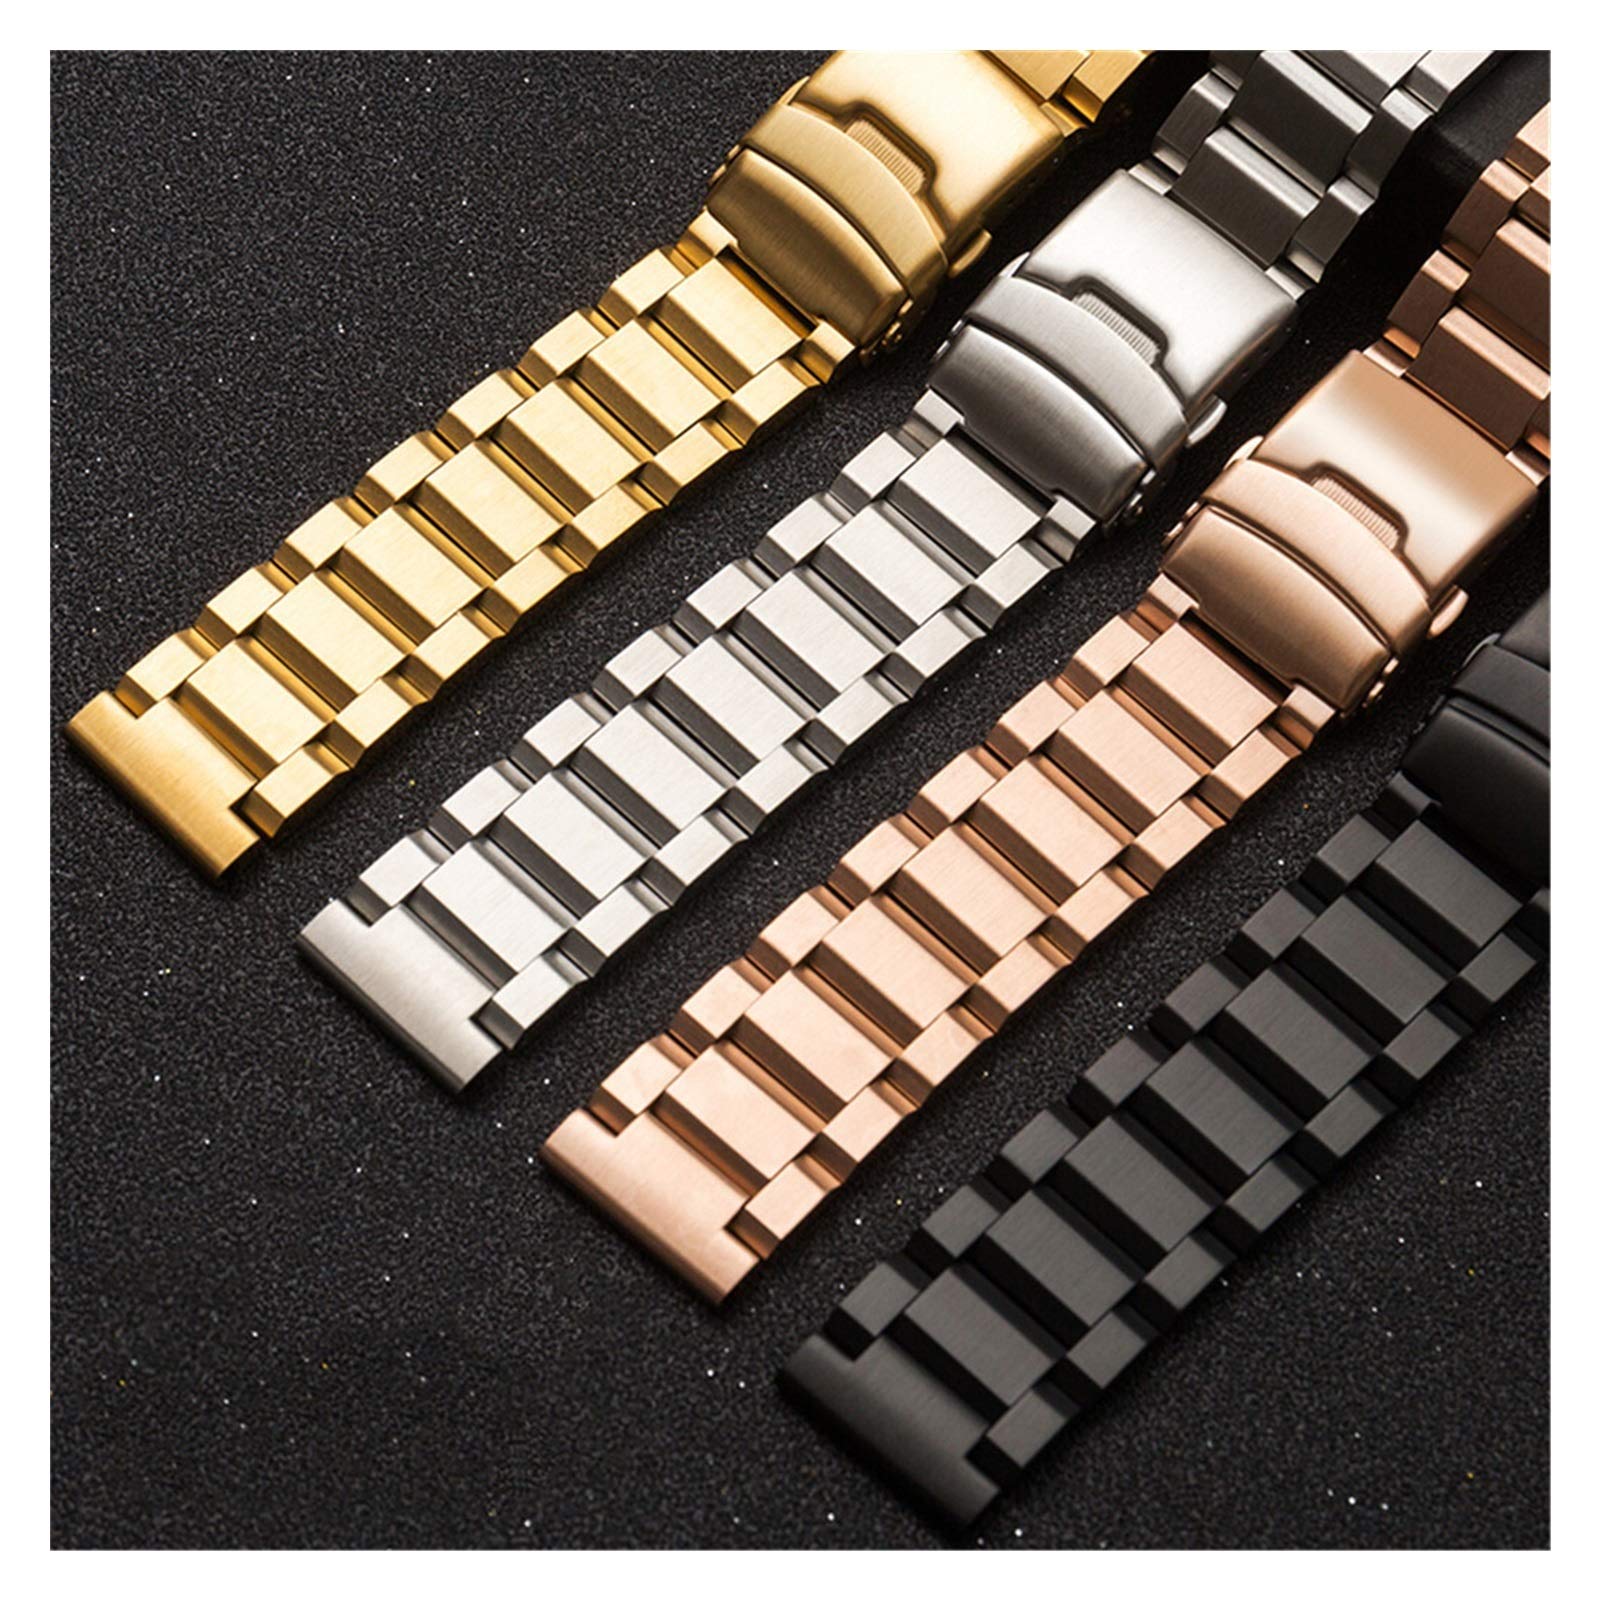 HNGM Men's Watchbands 18mm 19mm 20mm 21mm 22mm 23mm 24mm 25mm Stainless Steel Watchband Solid Metal Men Women Strap Bracelet Watch Band Accessories (Band Color : Rose Gold, Band Width : 22mm)